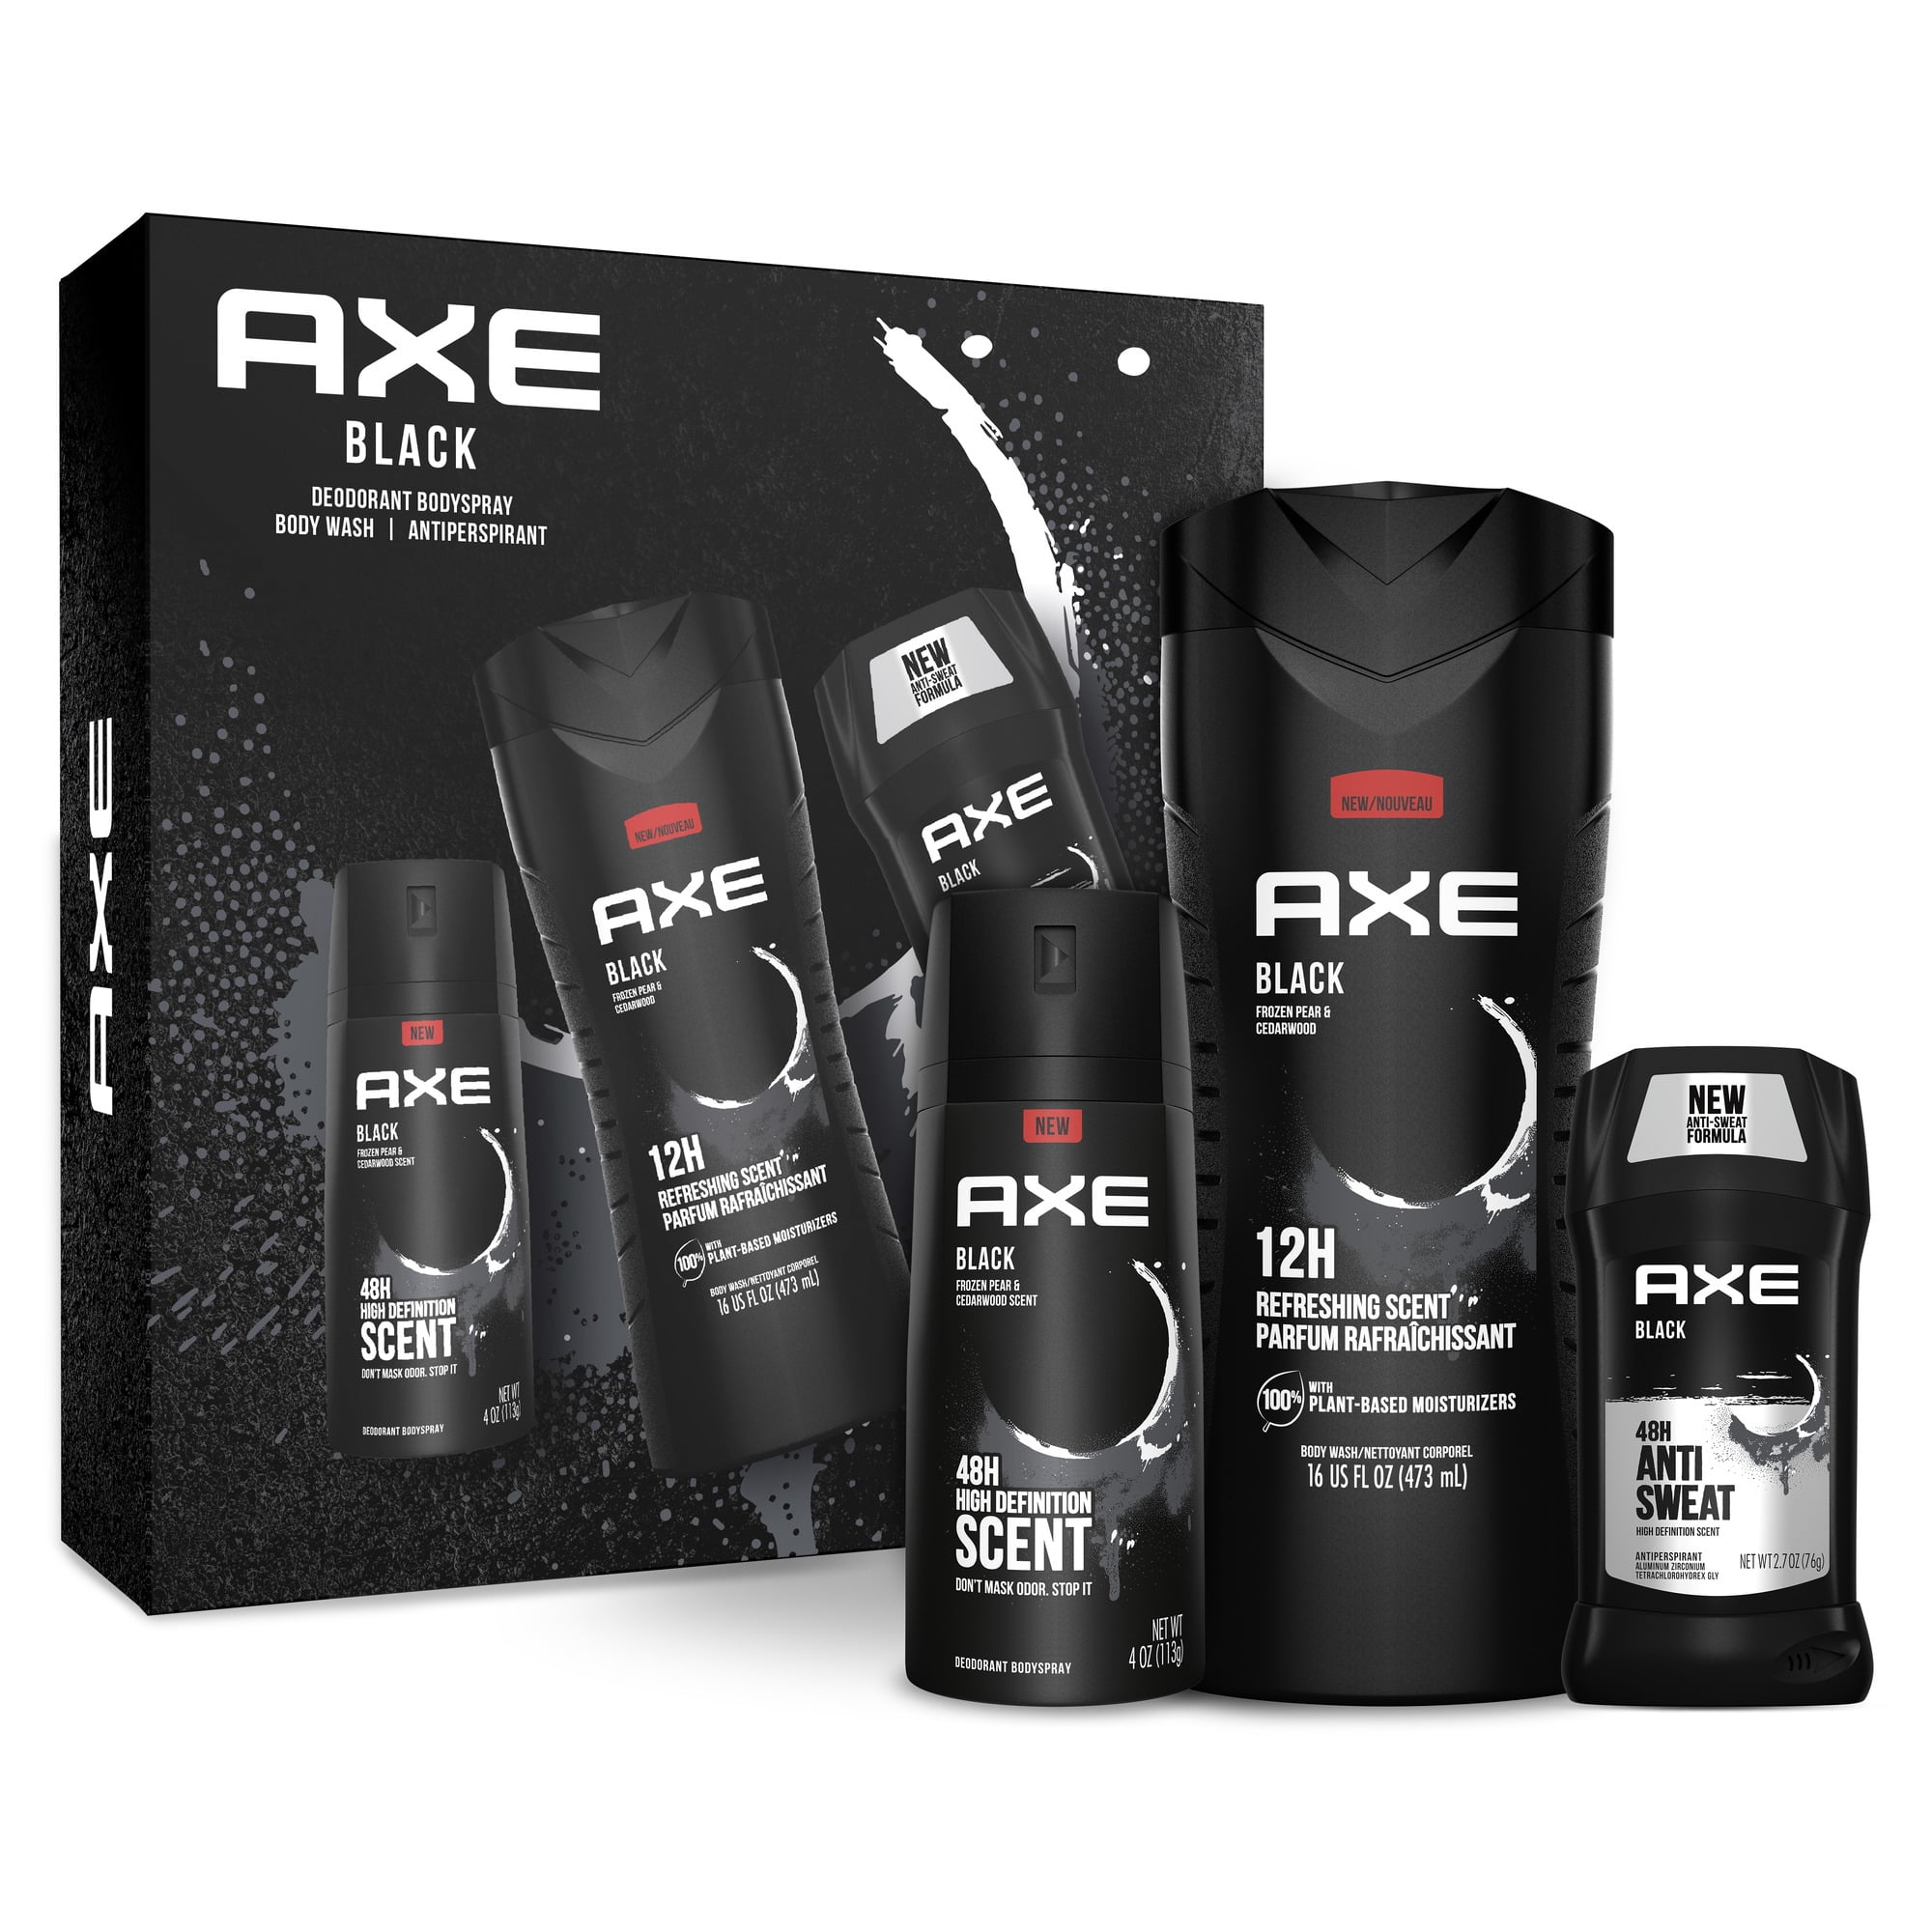 ($13 Value) AXE Black Holiday Gift Set (Deo Body Spray, Deo Stick, Body Wash) 3 Ct